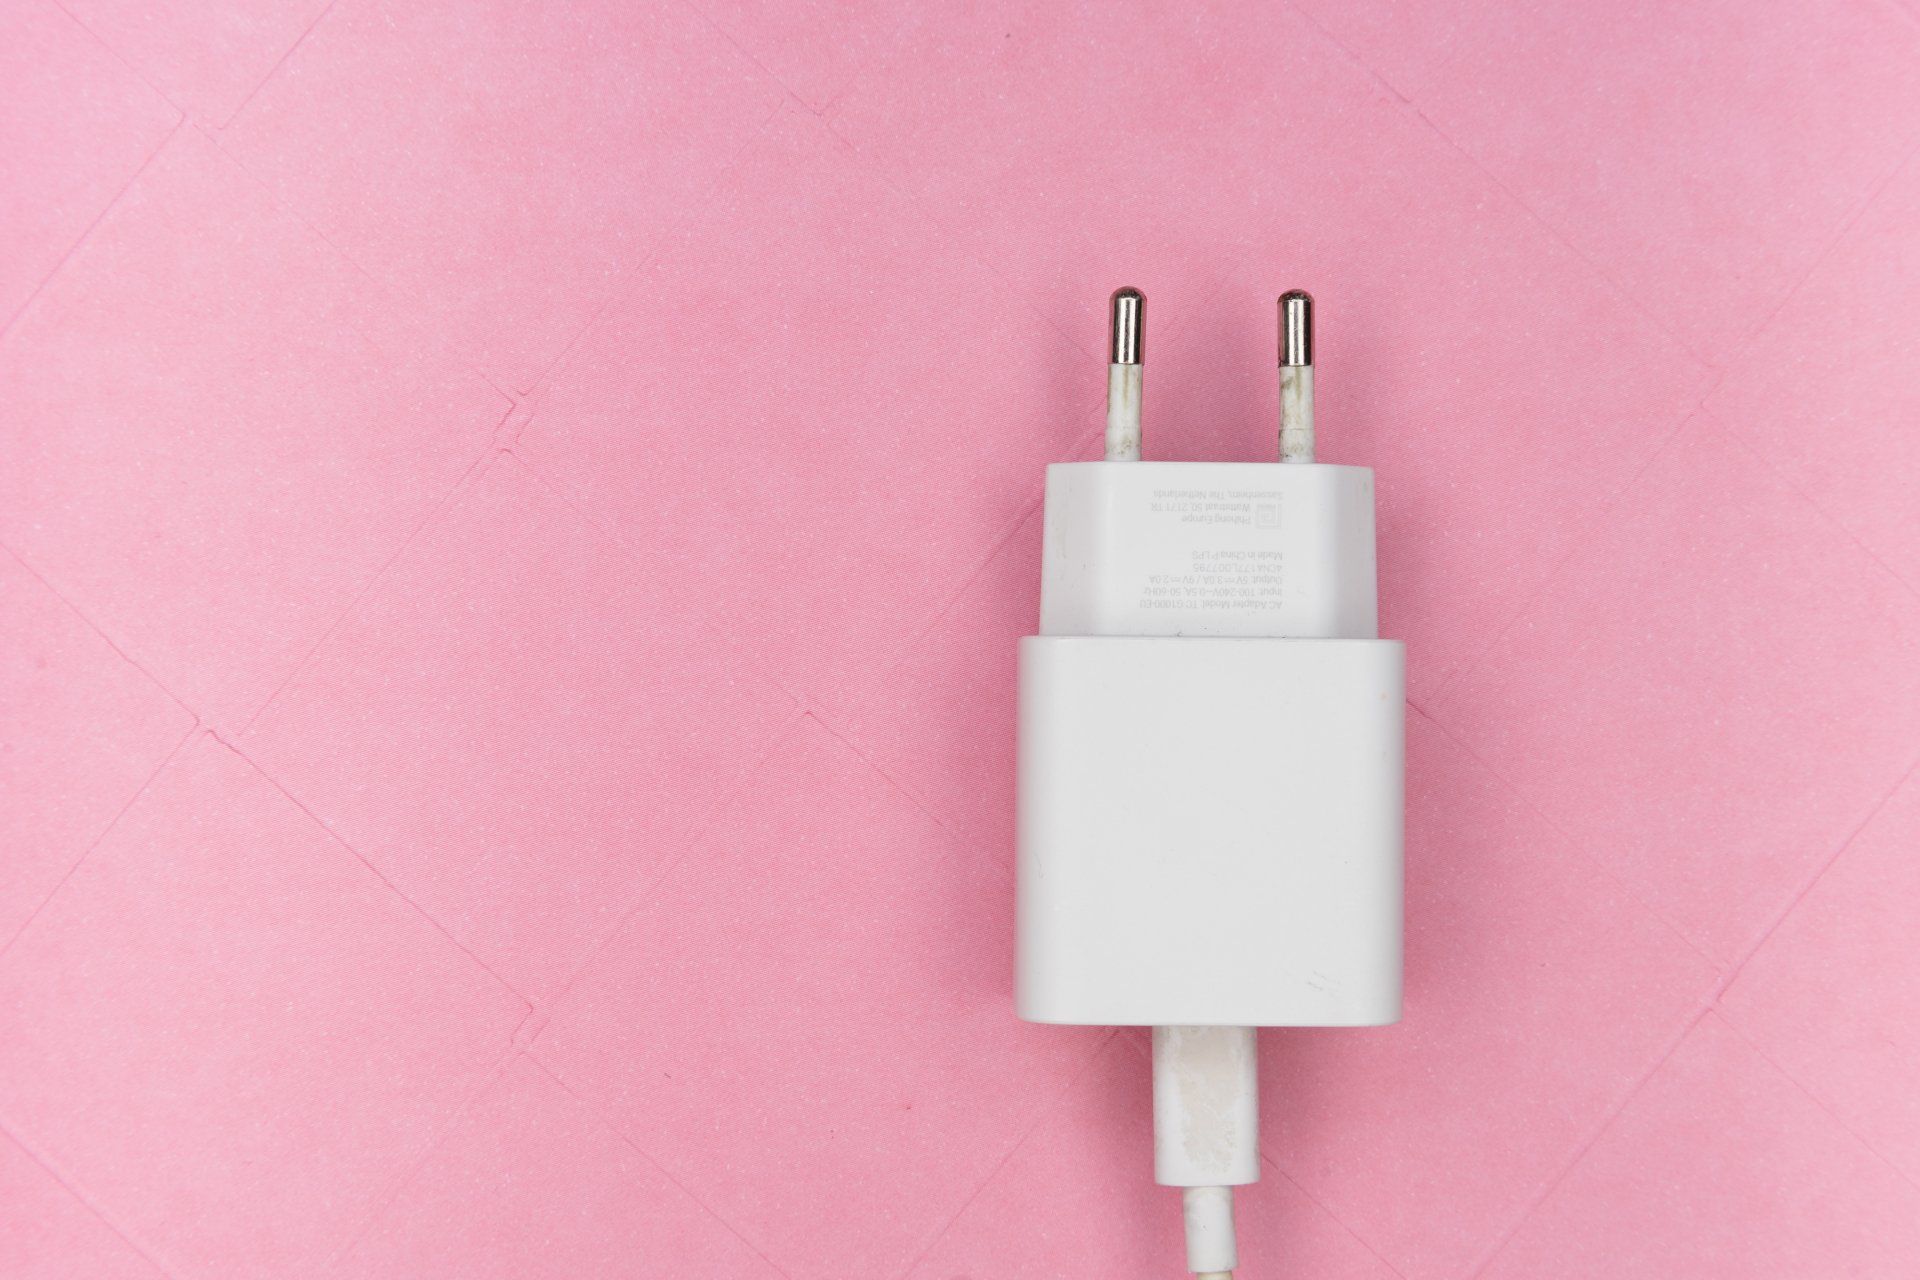 Plug against a pink background